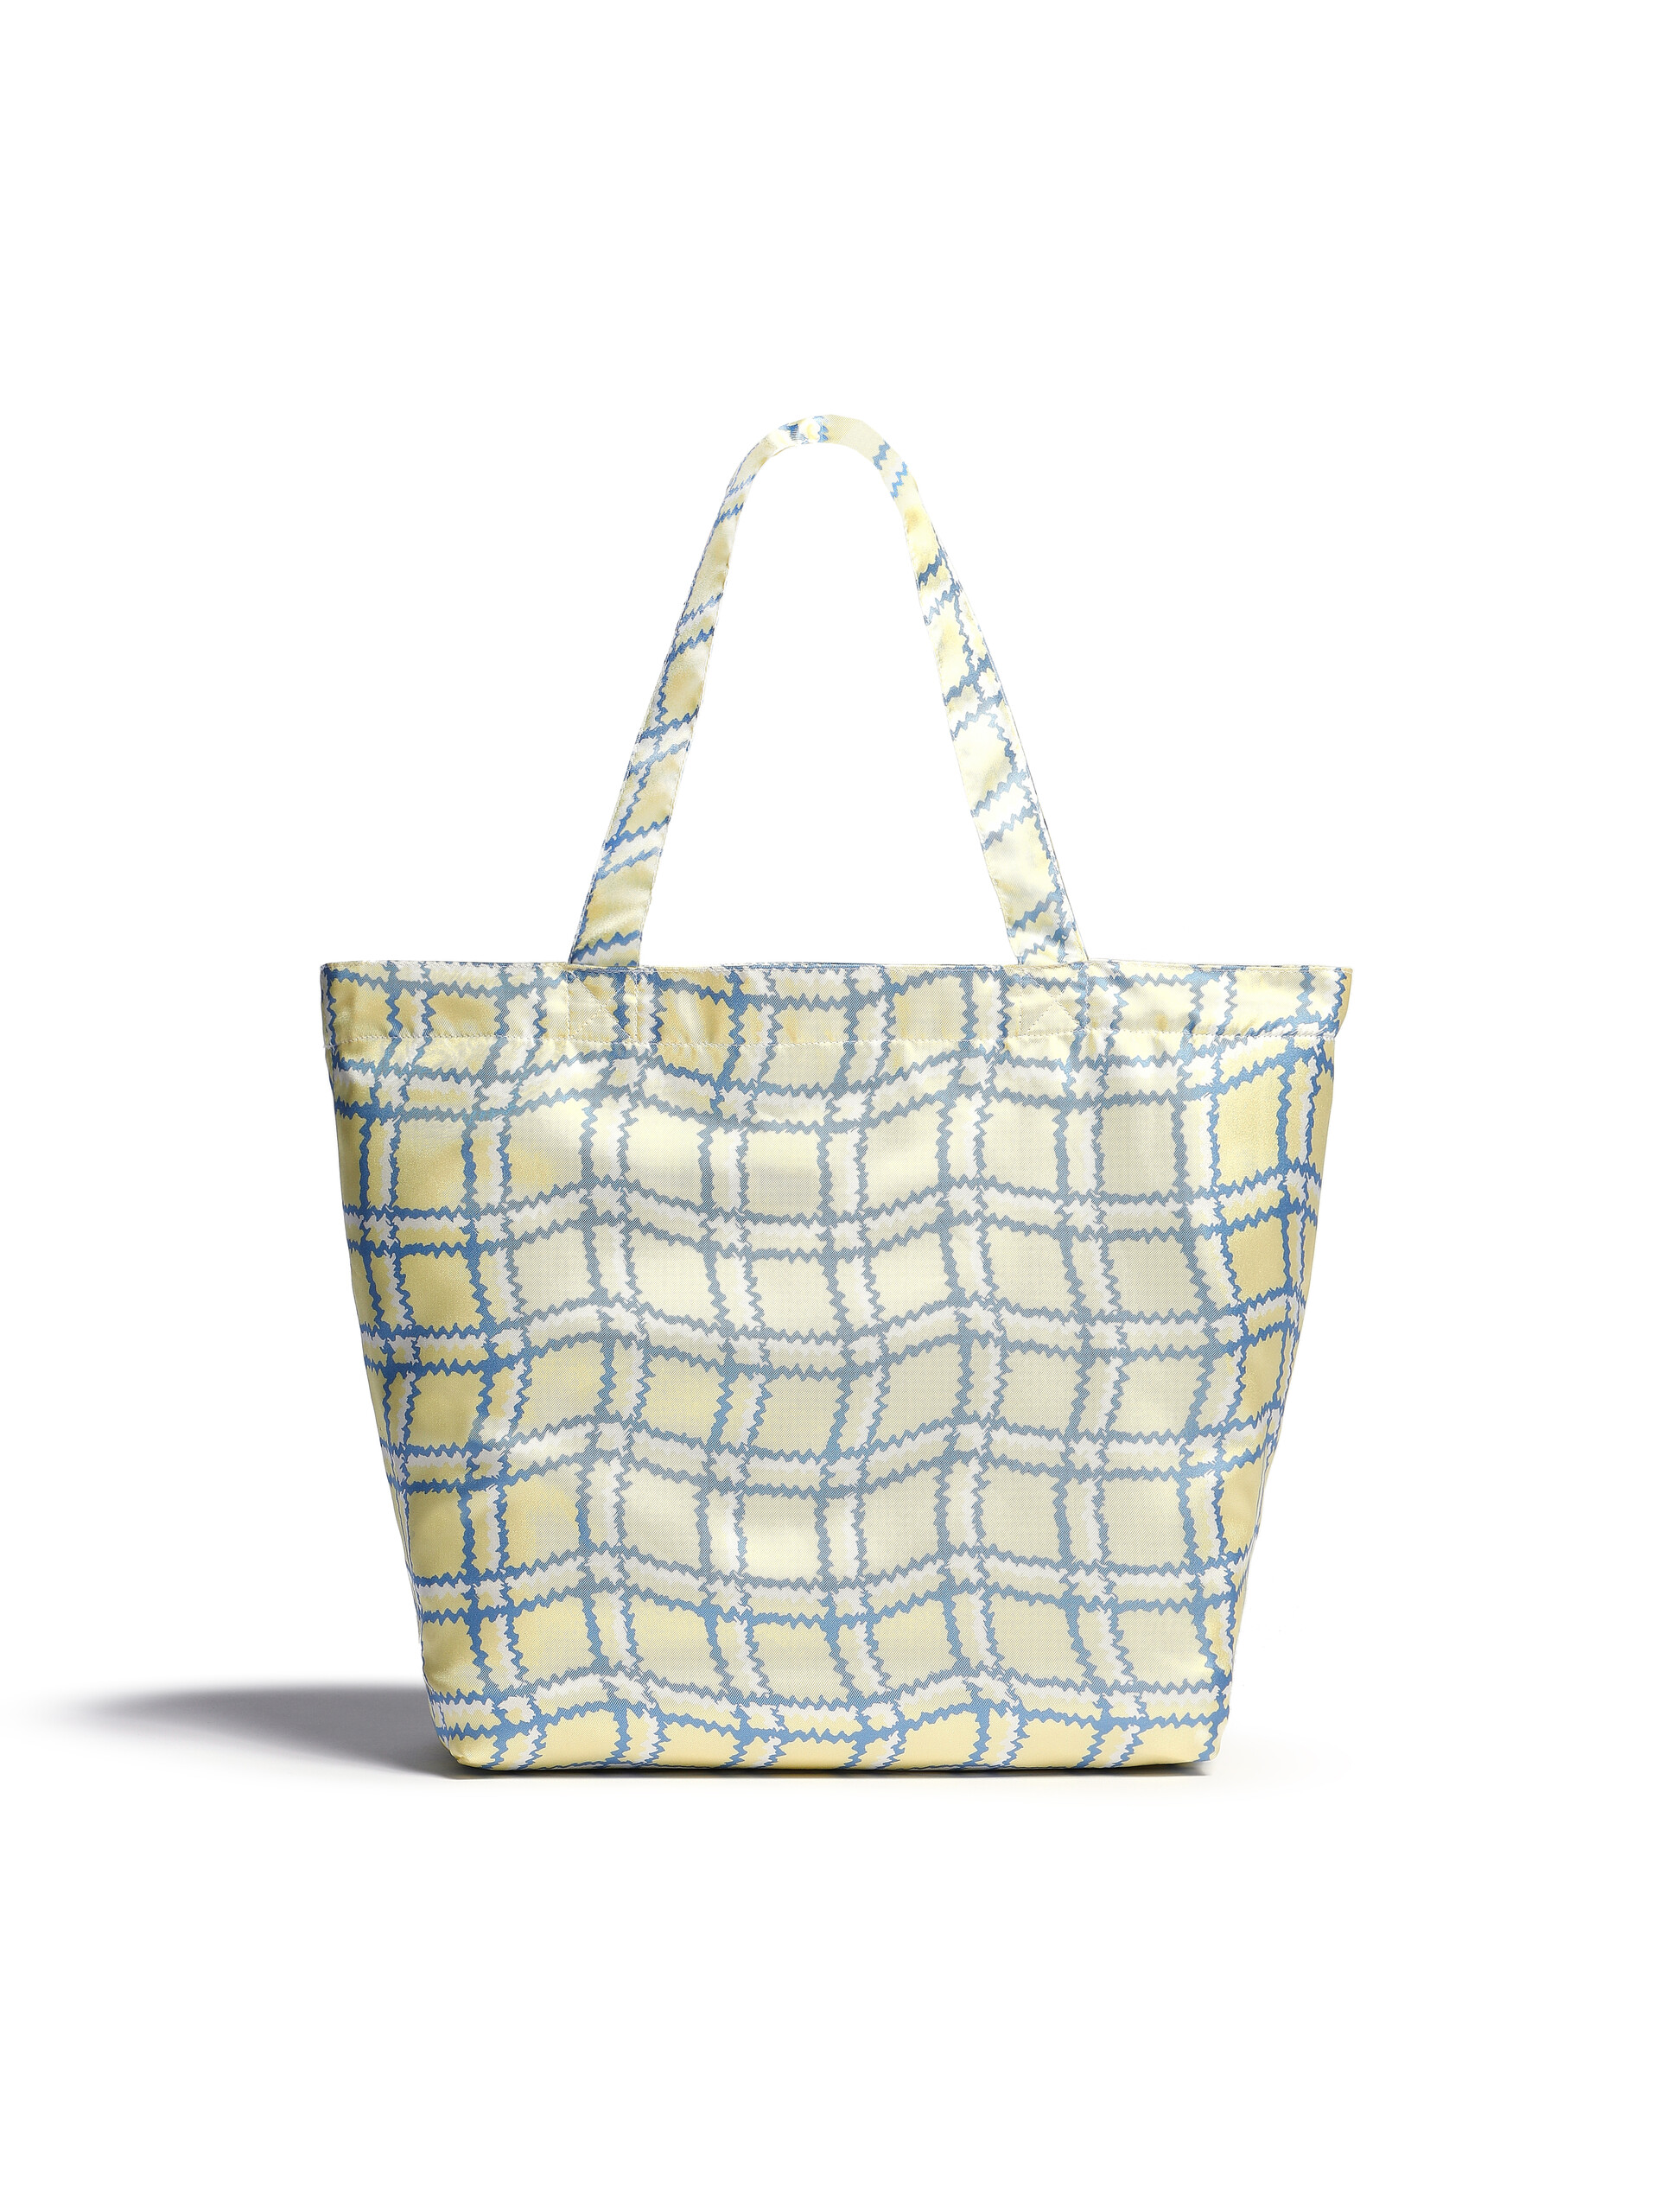 Yellow silk tote bag with archival check print - Bags - Image 3